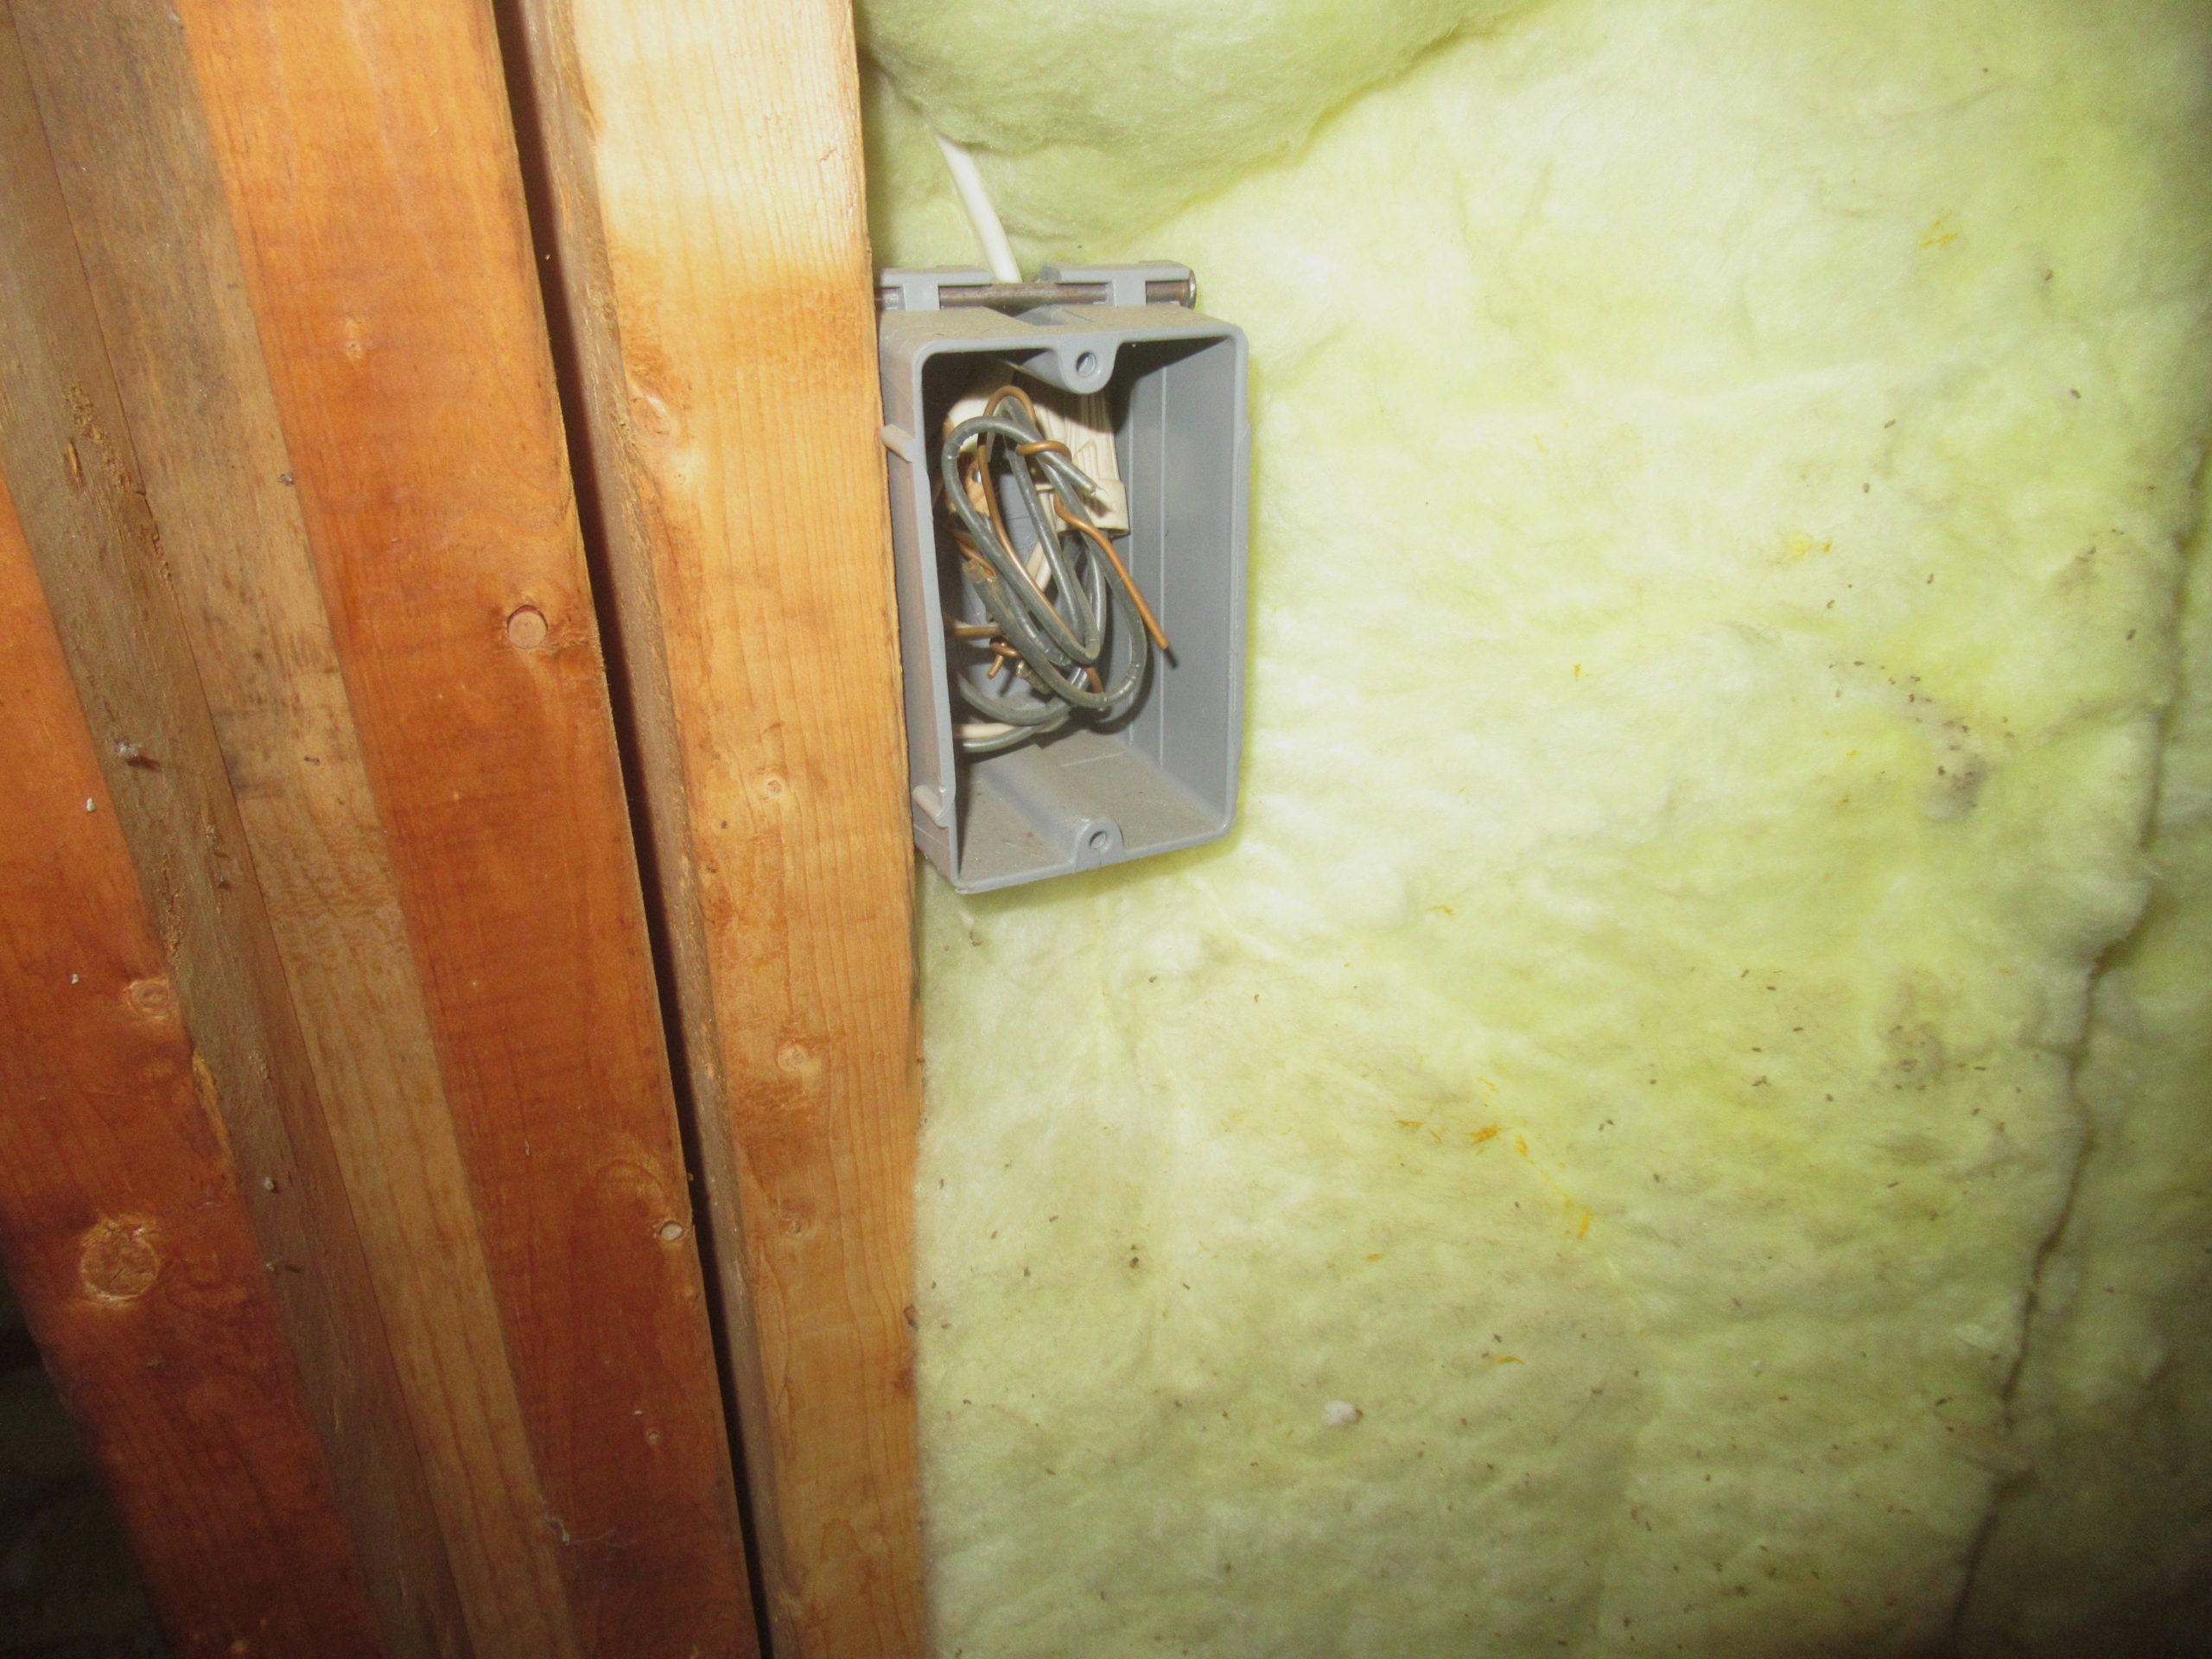 Uncovered electrical junction box